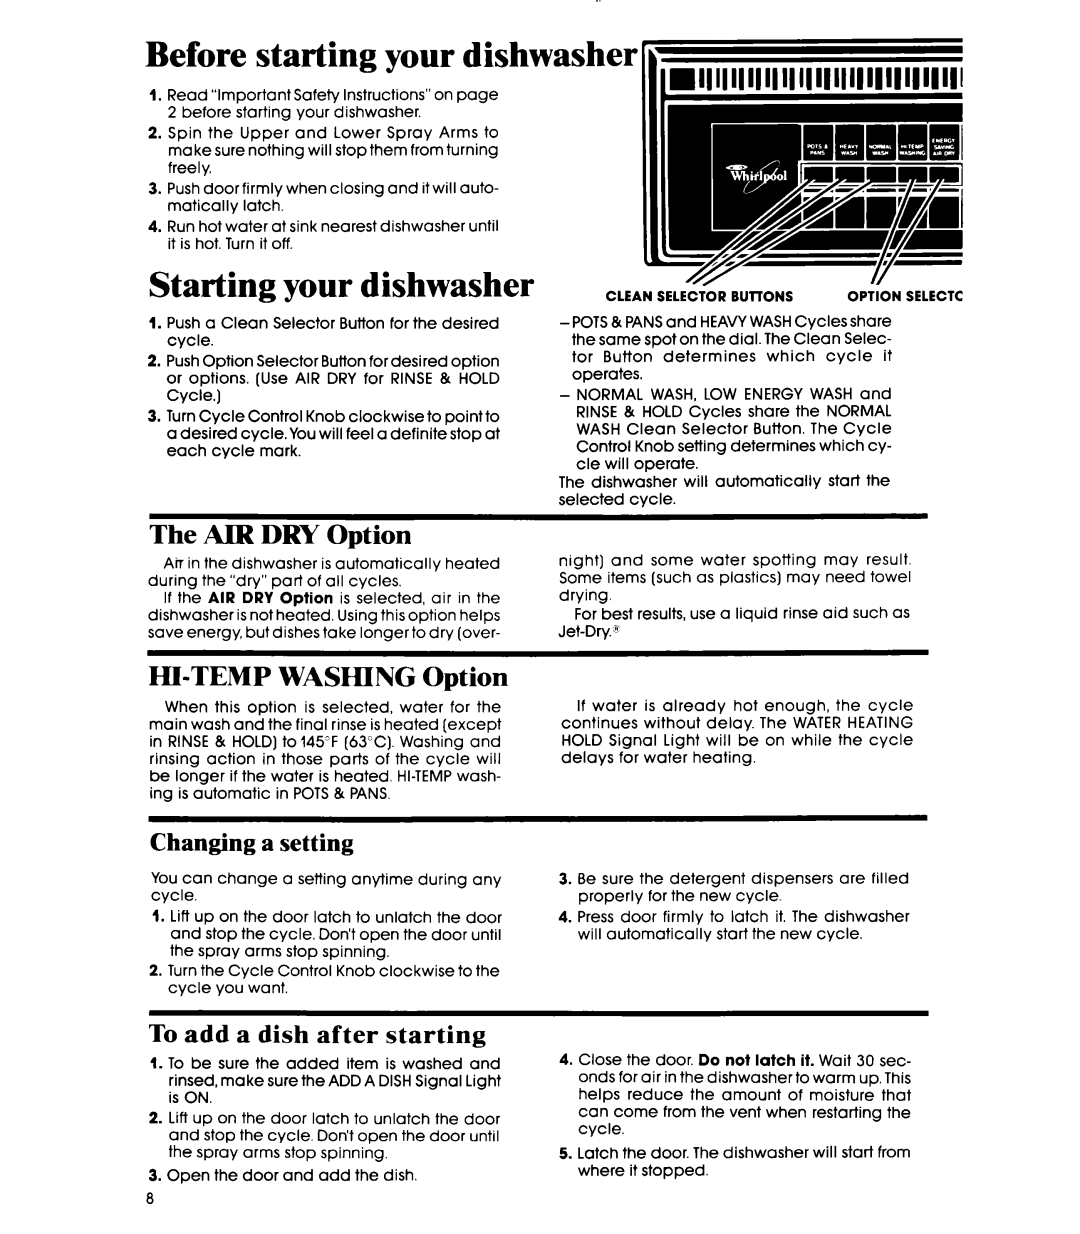 Whirlpool DU9000XR manual Before starting your dishwa .sher, Starting your dishwasher, ~~‘1’1’1’1’1’1’1’11’1111111111111 